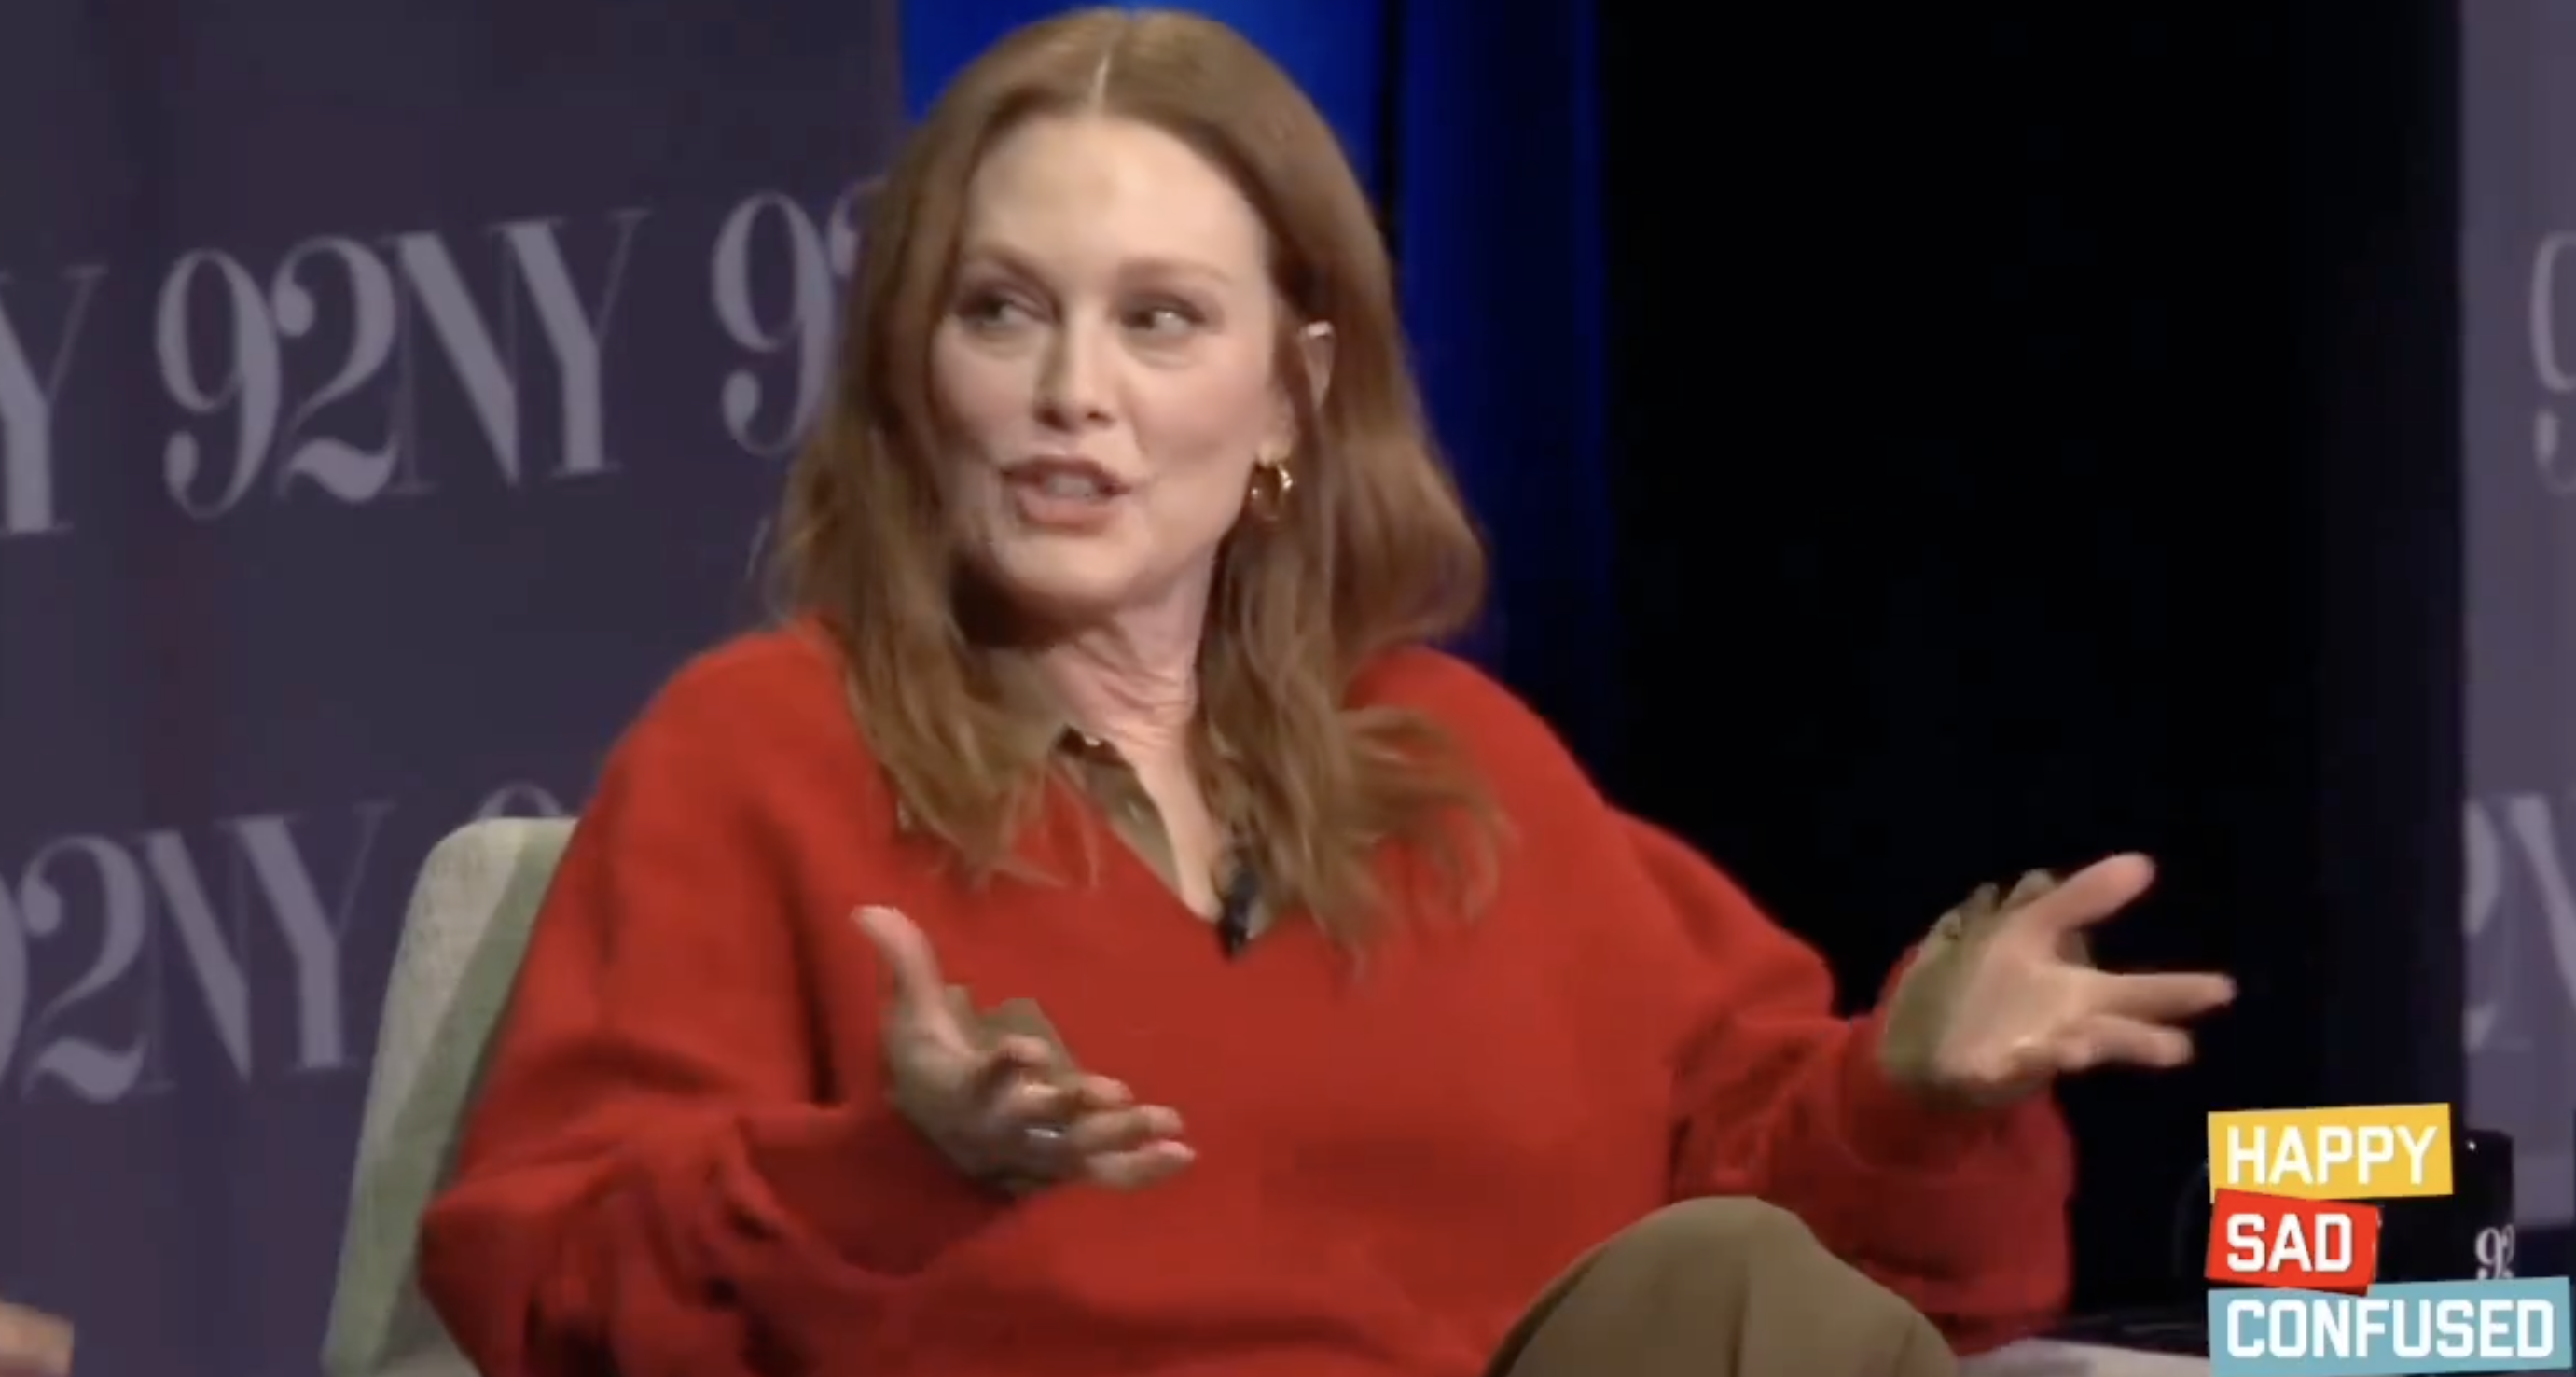 Close-up of Julianne seated and speaking onstage